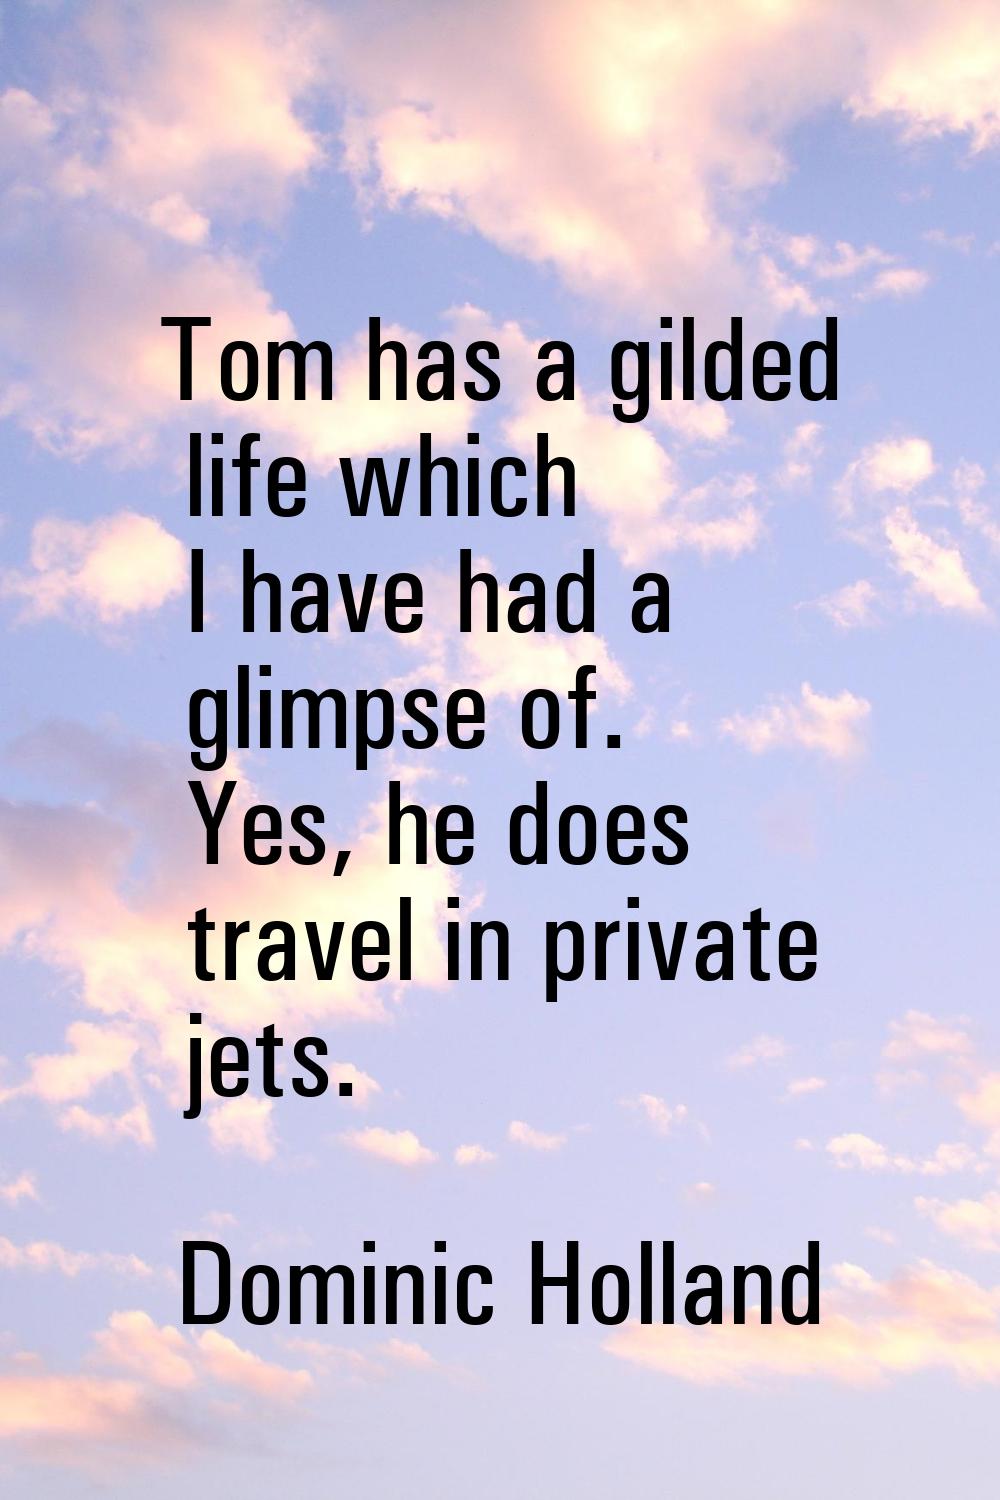 Tom has a gilded life which I have had a glimpse of. Yes, he does travel in private jets.